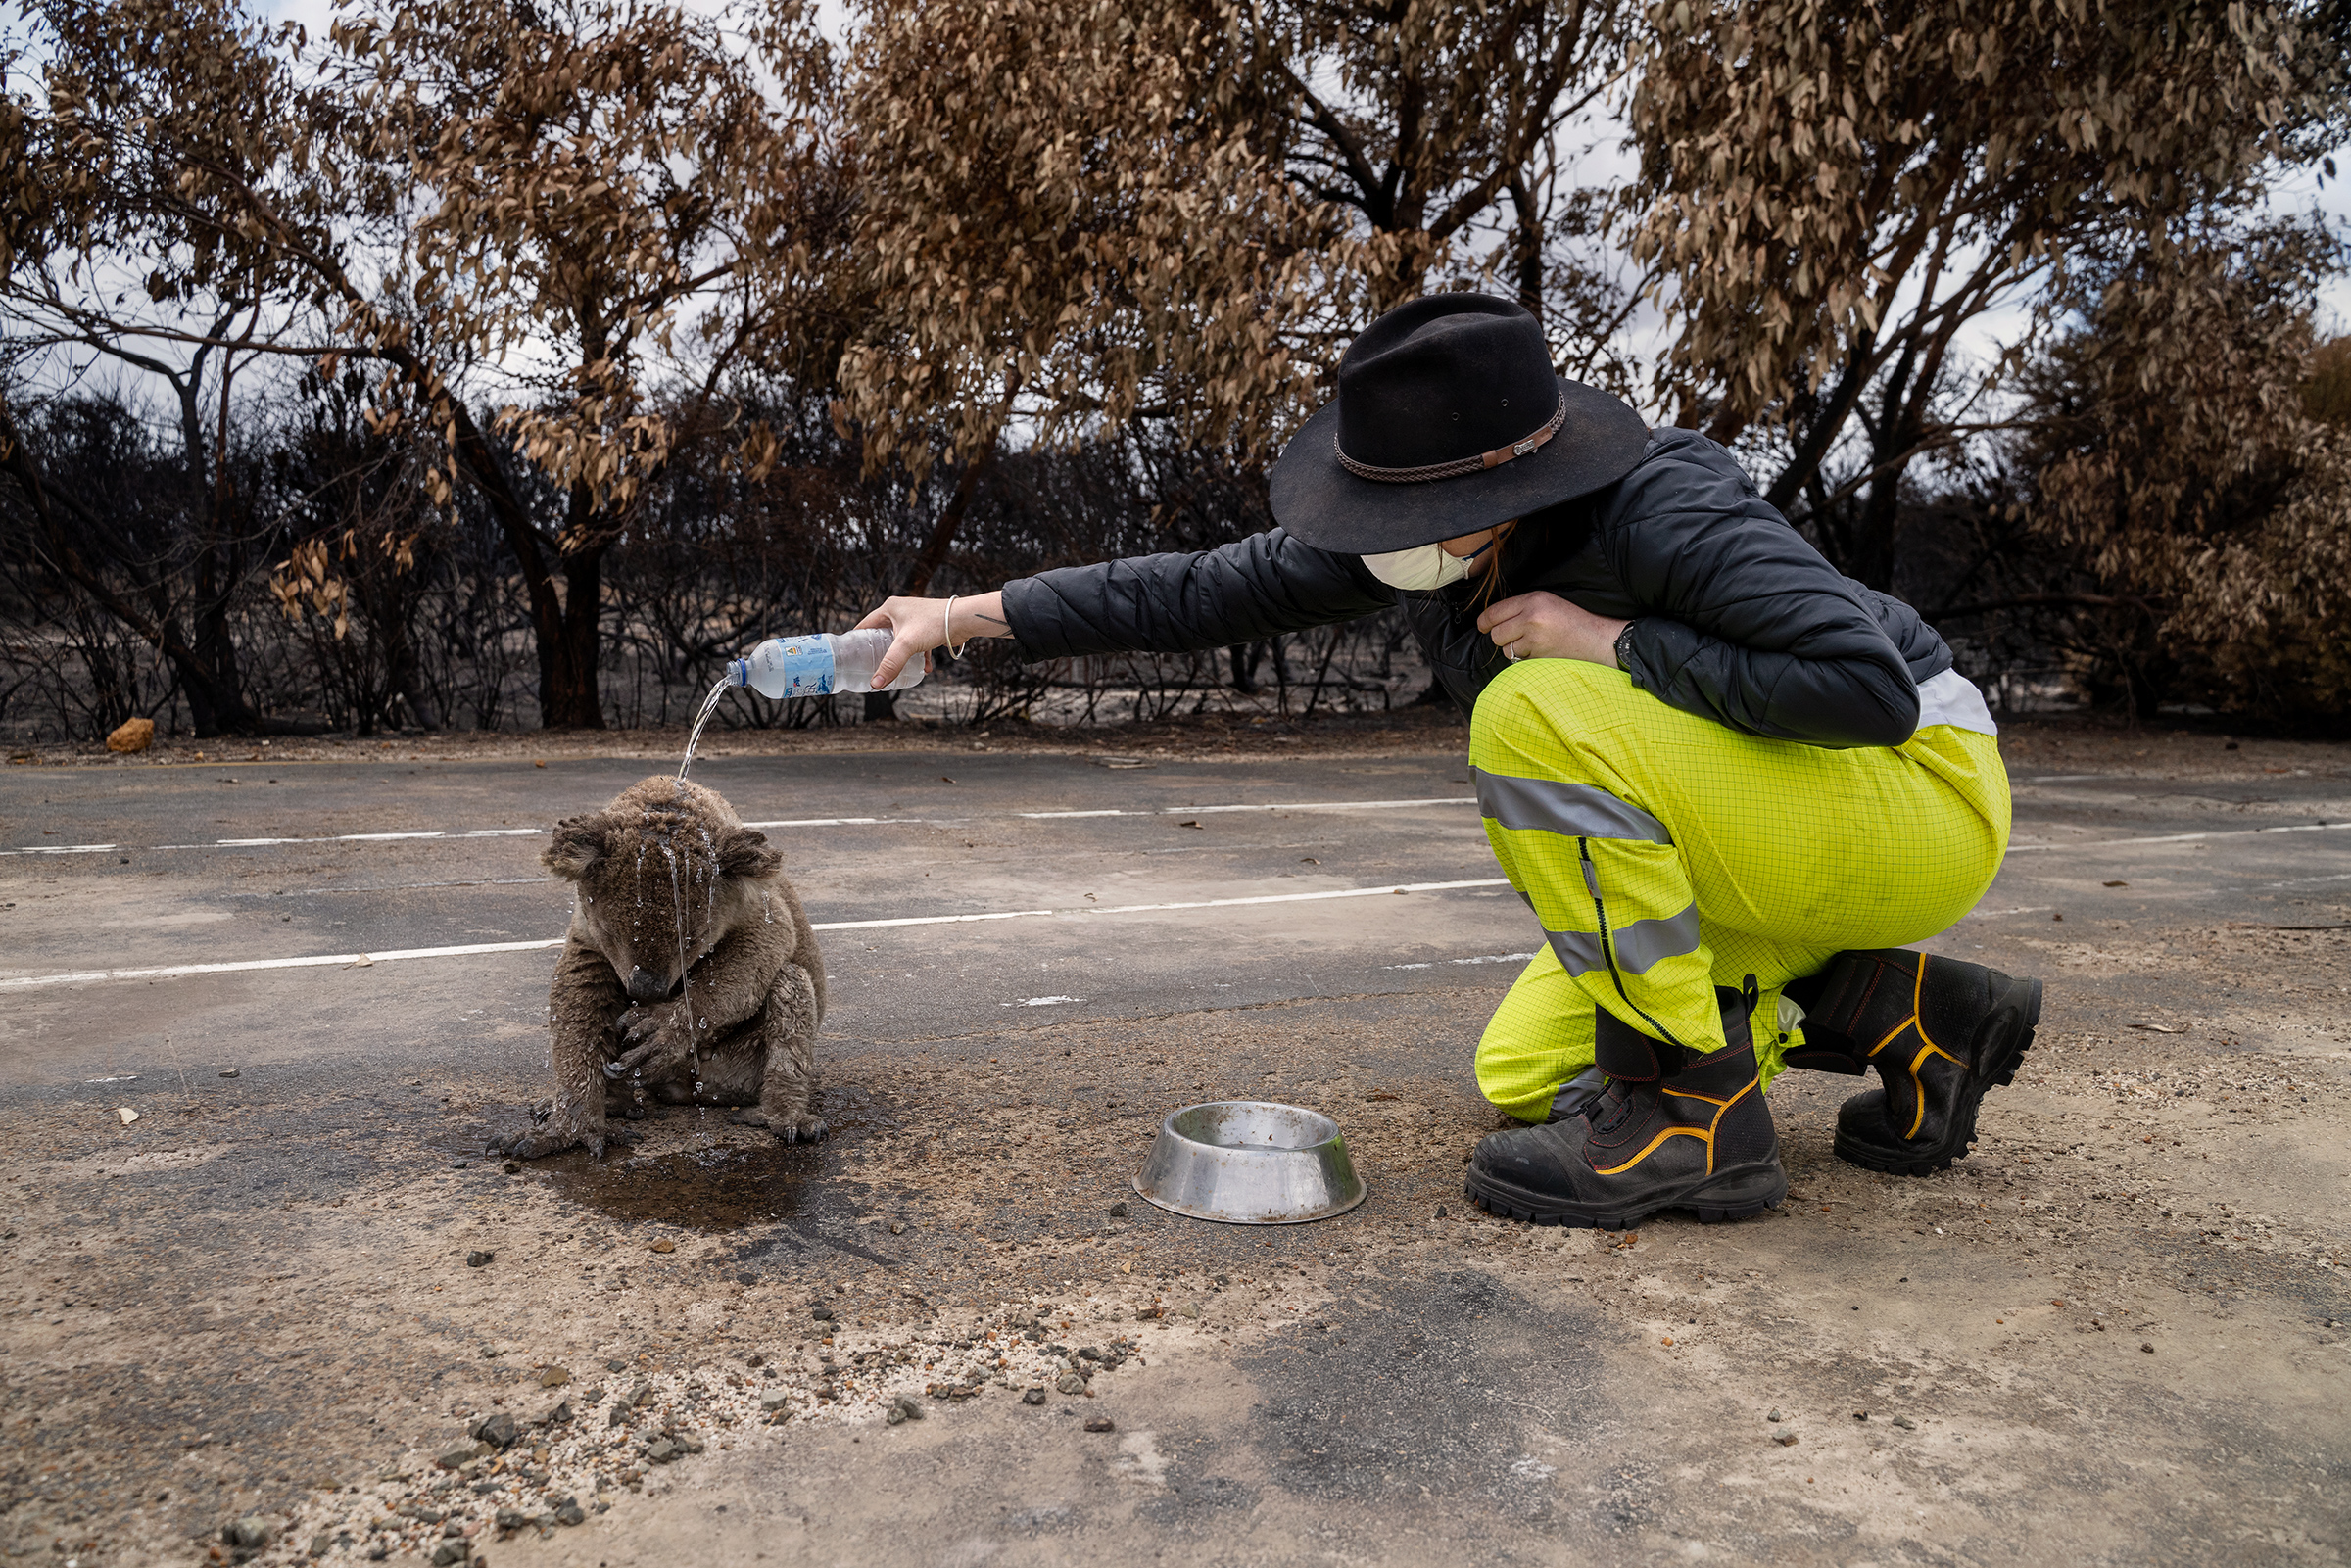 A fire-response volunteer pours water on a koala injured in a bushfire on Kangaroo Island, South Australia, on Jan. 16. It was quickly hustled to a nearby shelter, joining hundreds of other animals receiving care. (Adam Ferguson for TIME)